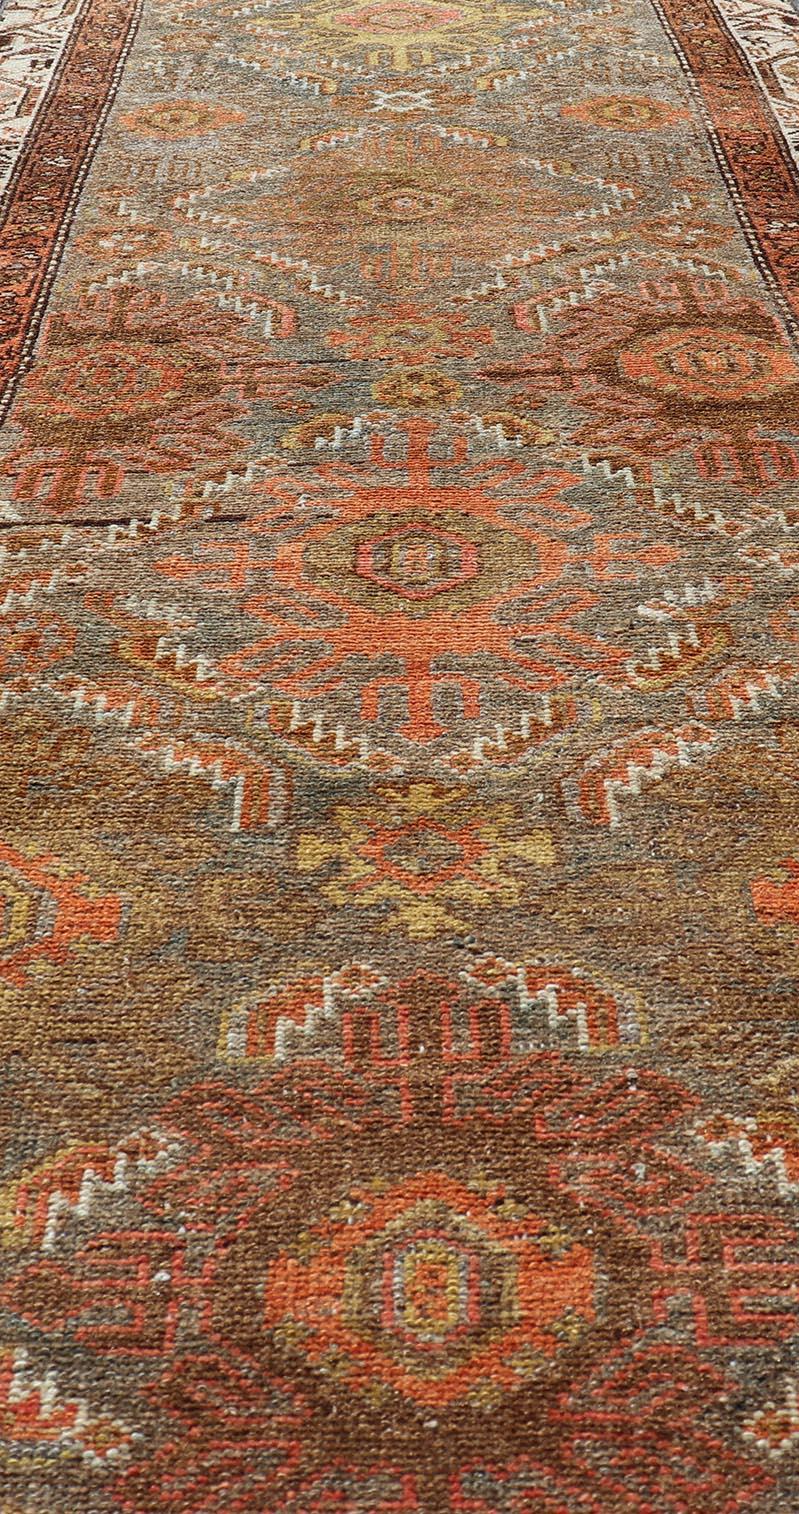 Antique Persian Hamadan Long Runner in Brown, Gray and Earth Tones For Sale 2